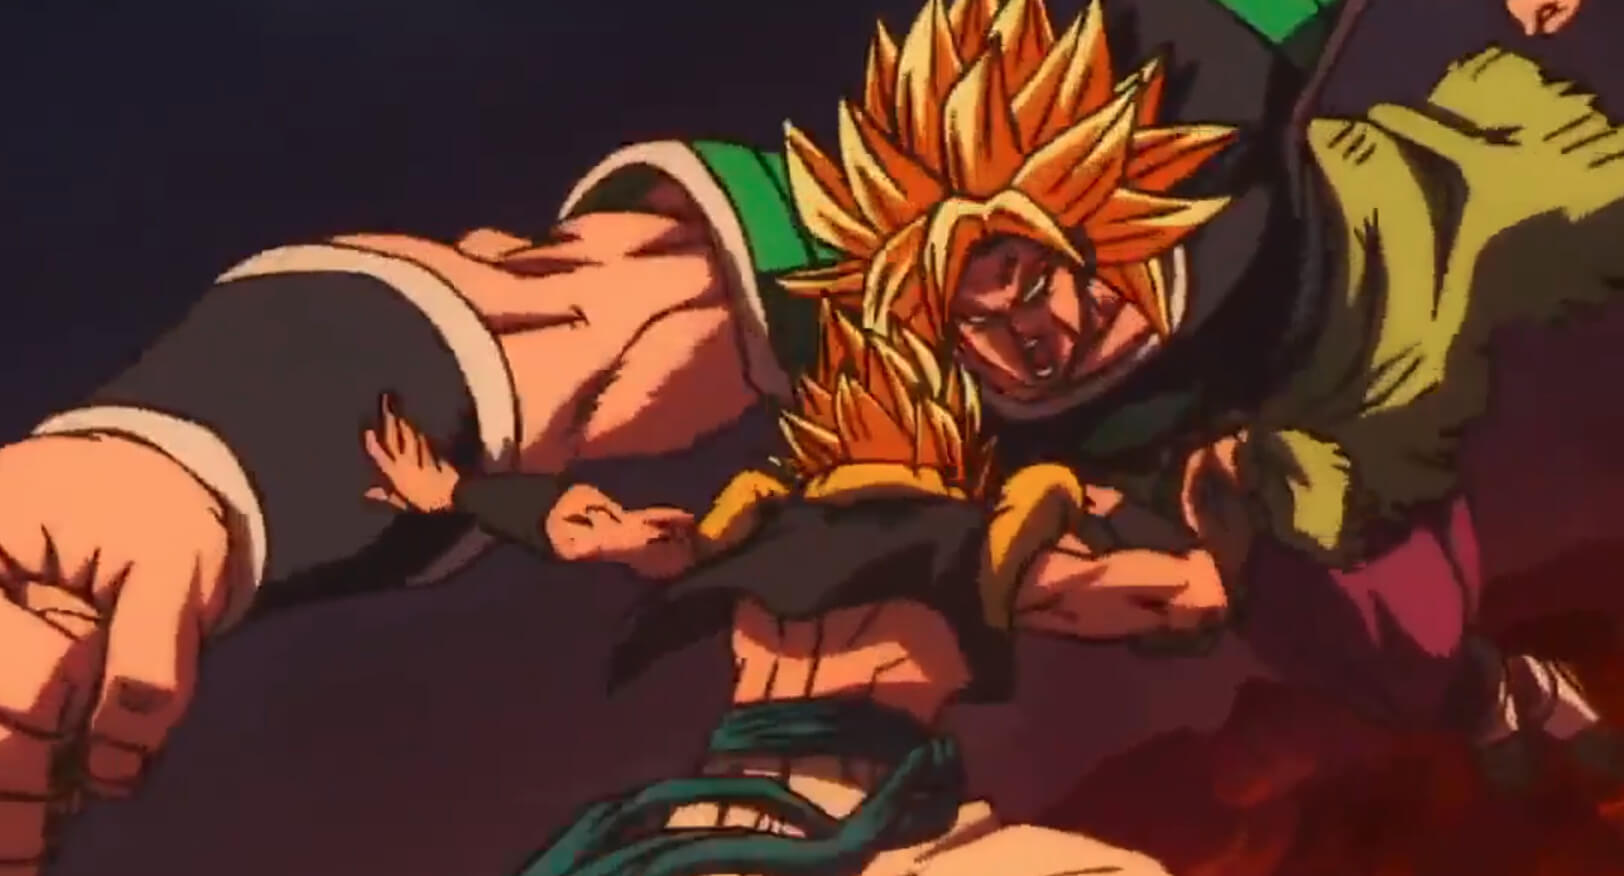 assyl akhmetov recommends how tall is broly pic